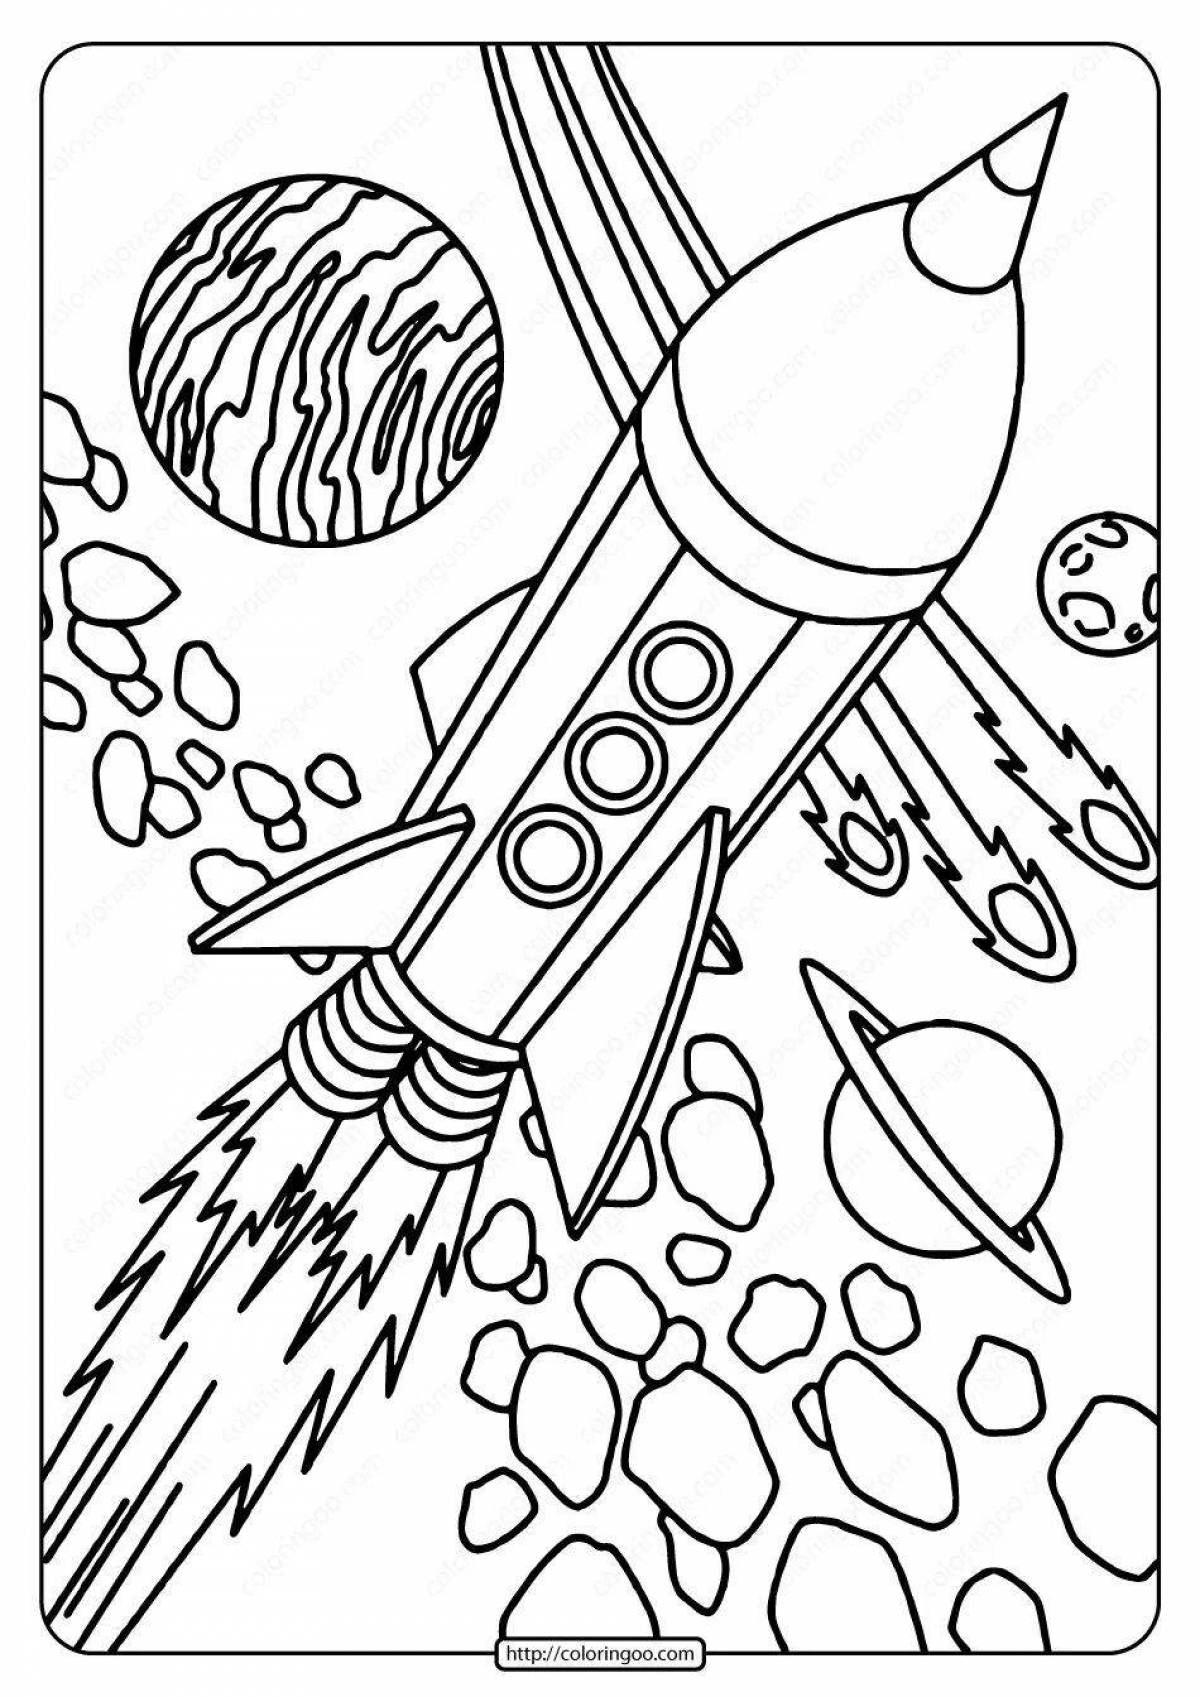 Luxury space rocket coloring page